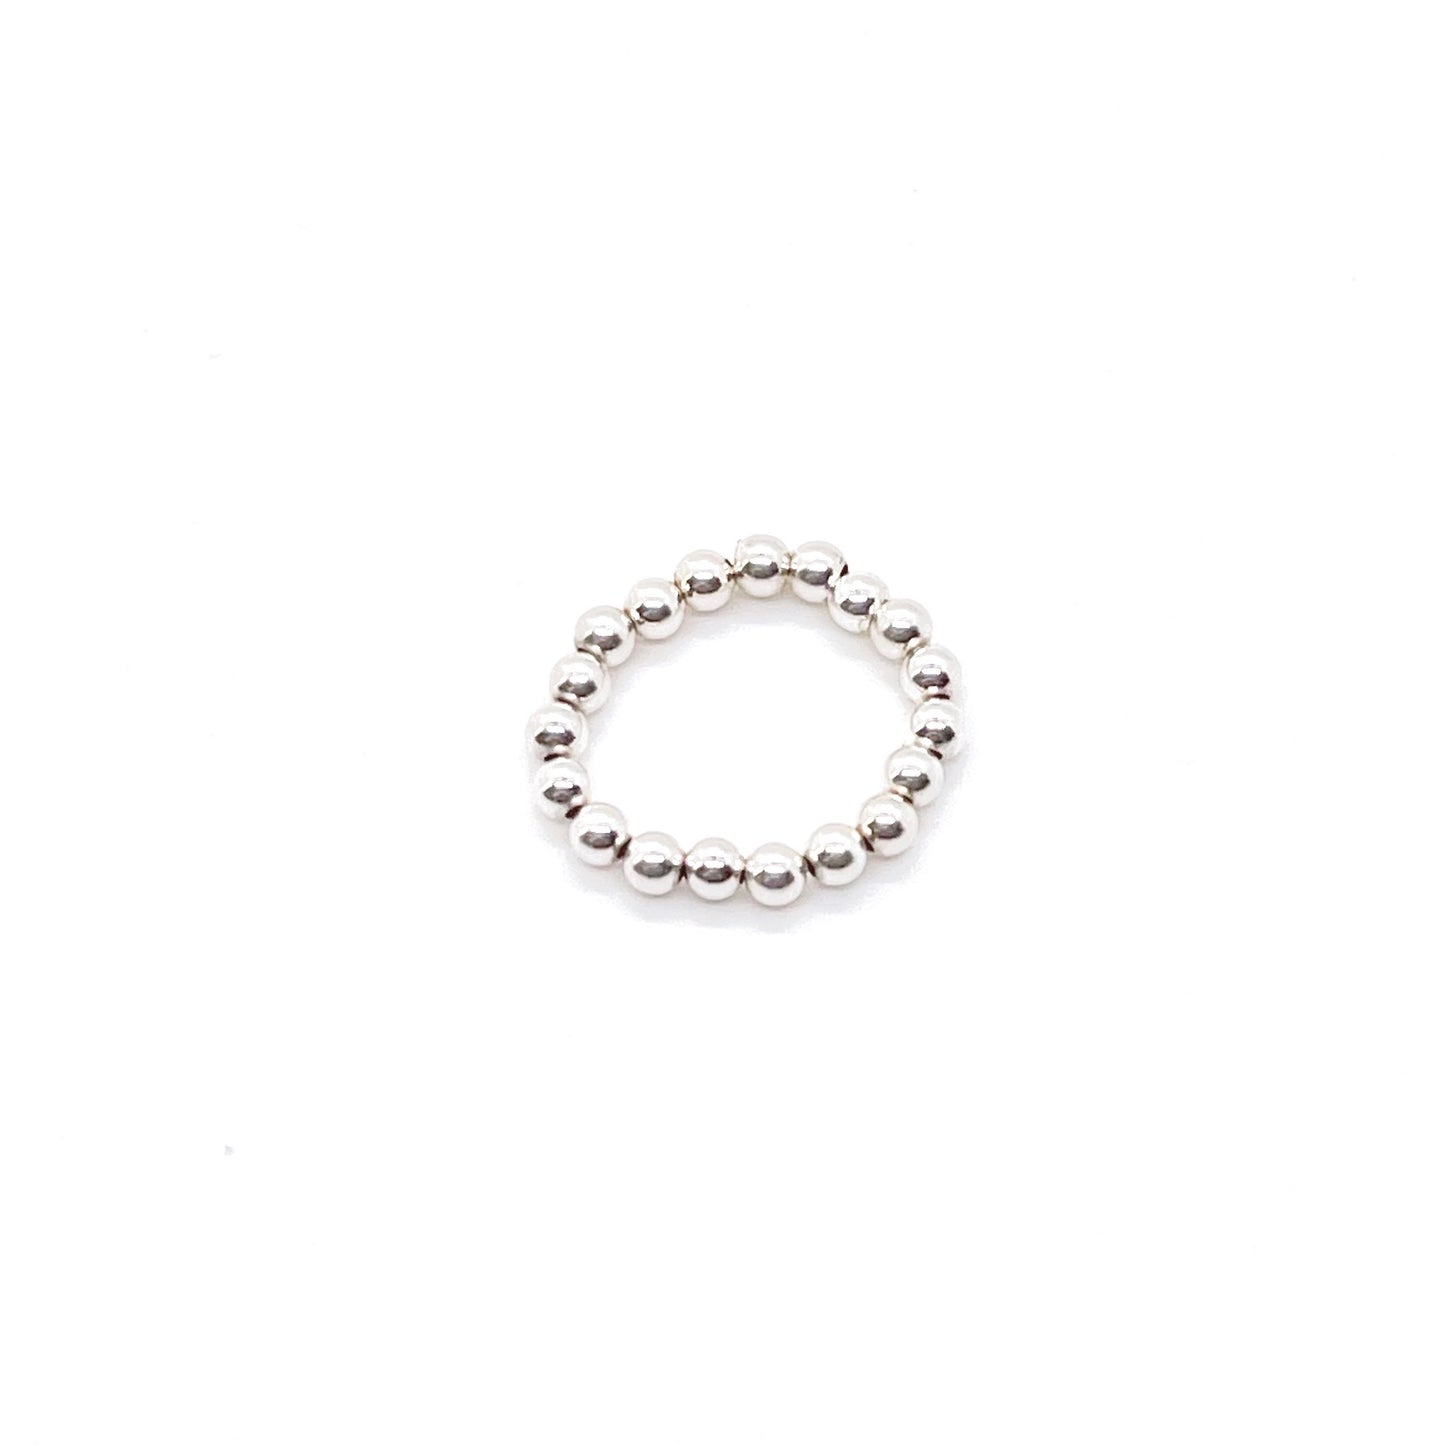 Silver stretch ring with 3mm waterproof sterling silver beads.